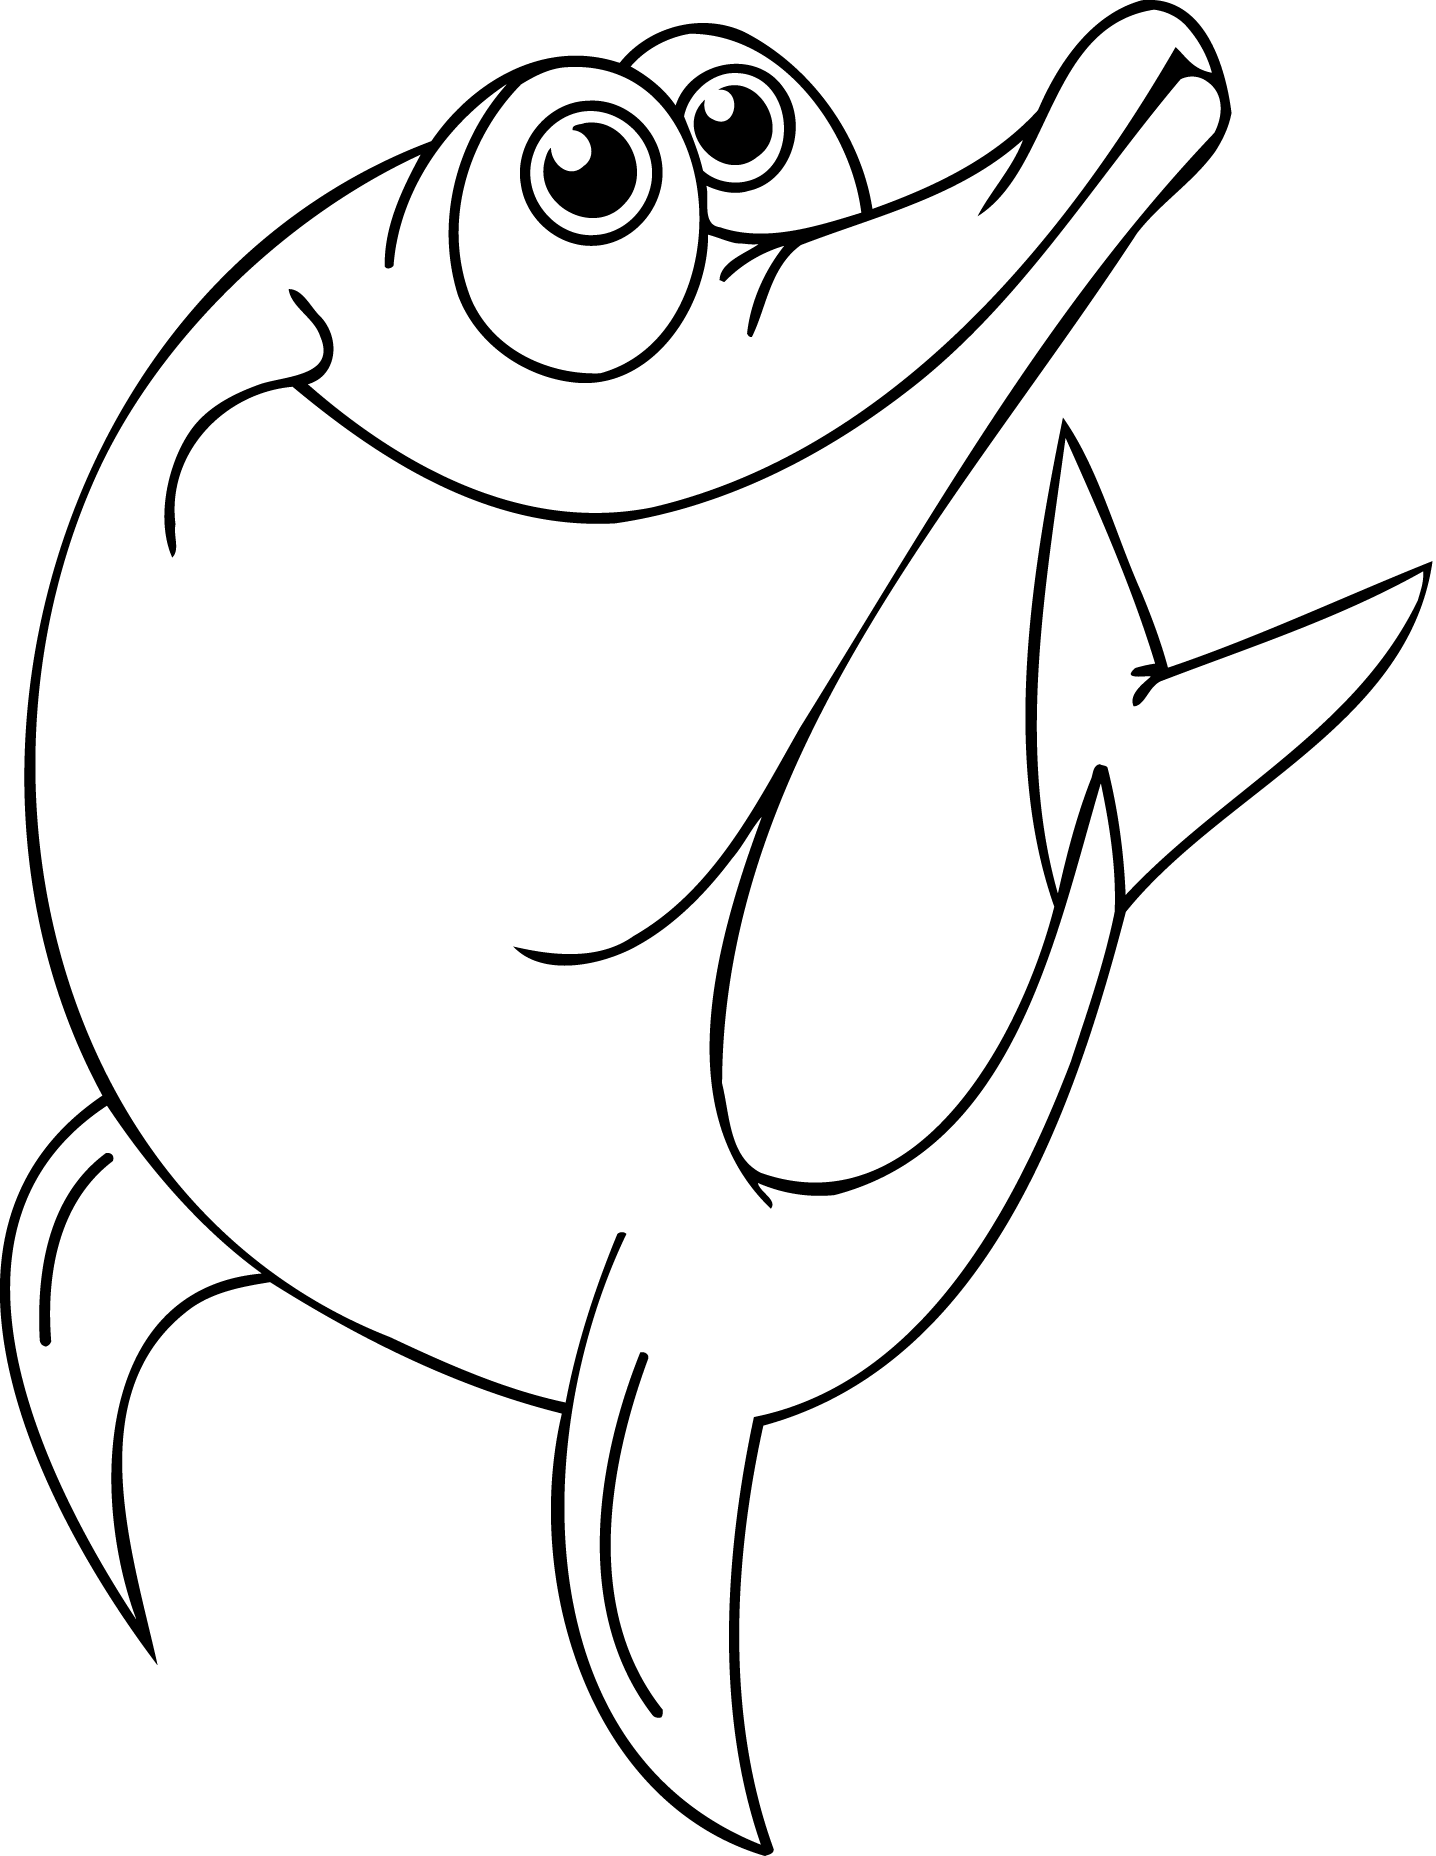 Dolphin coloring pages for kids printable : - Coloring Guru